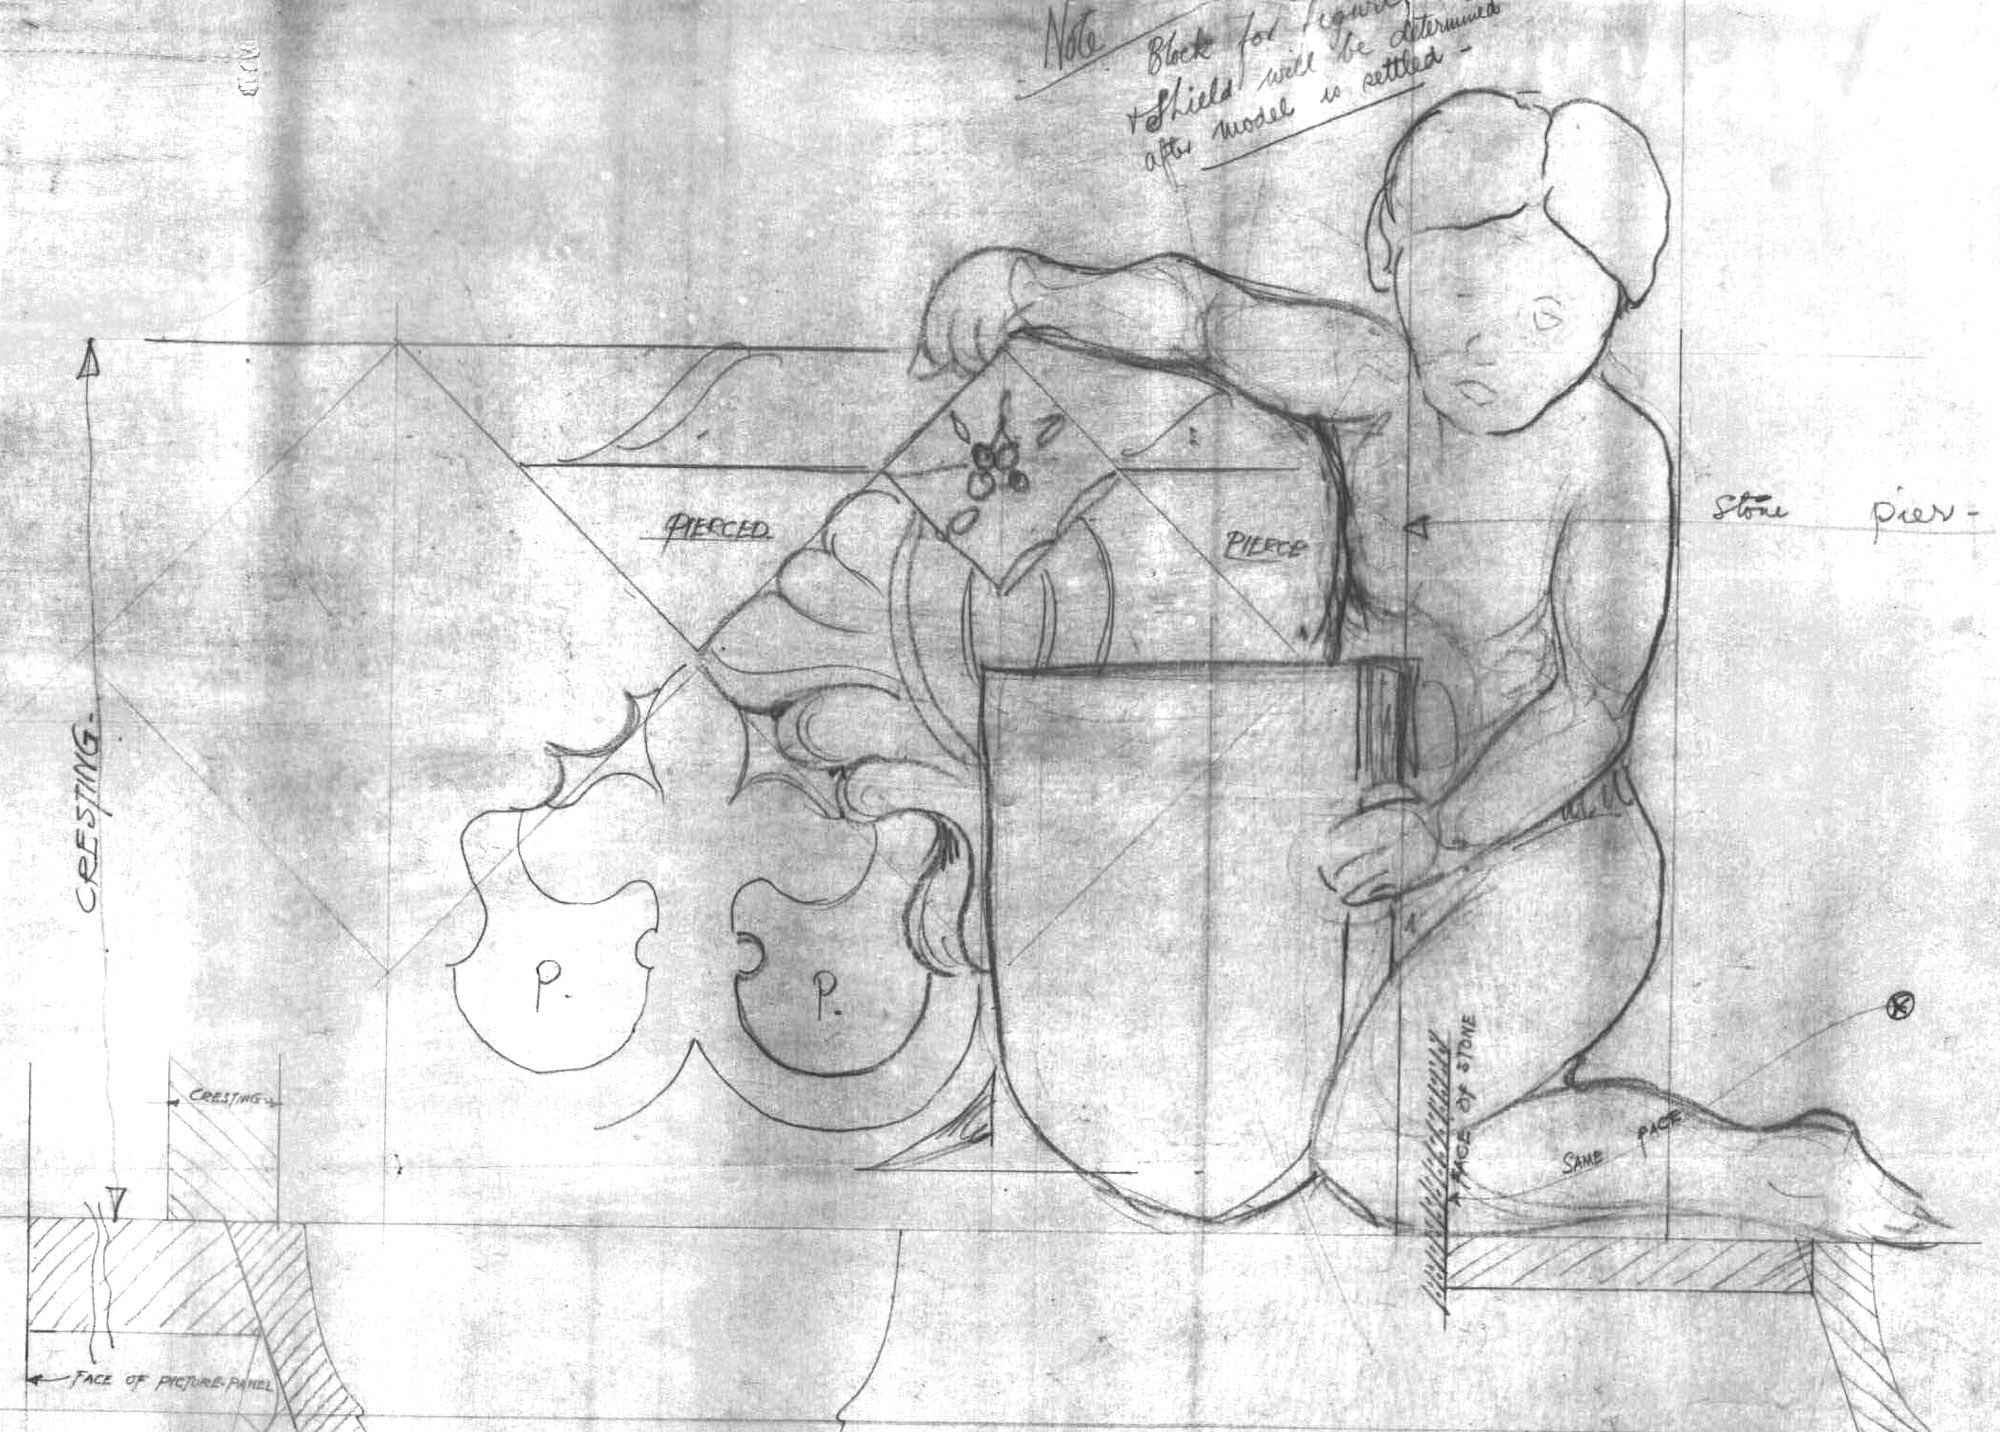 A line sketch from the 1920s depicts a cherub and the fretwork cresting in the Senate Chamber.